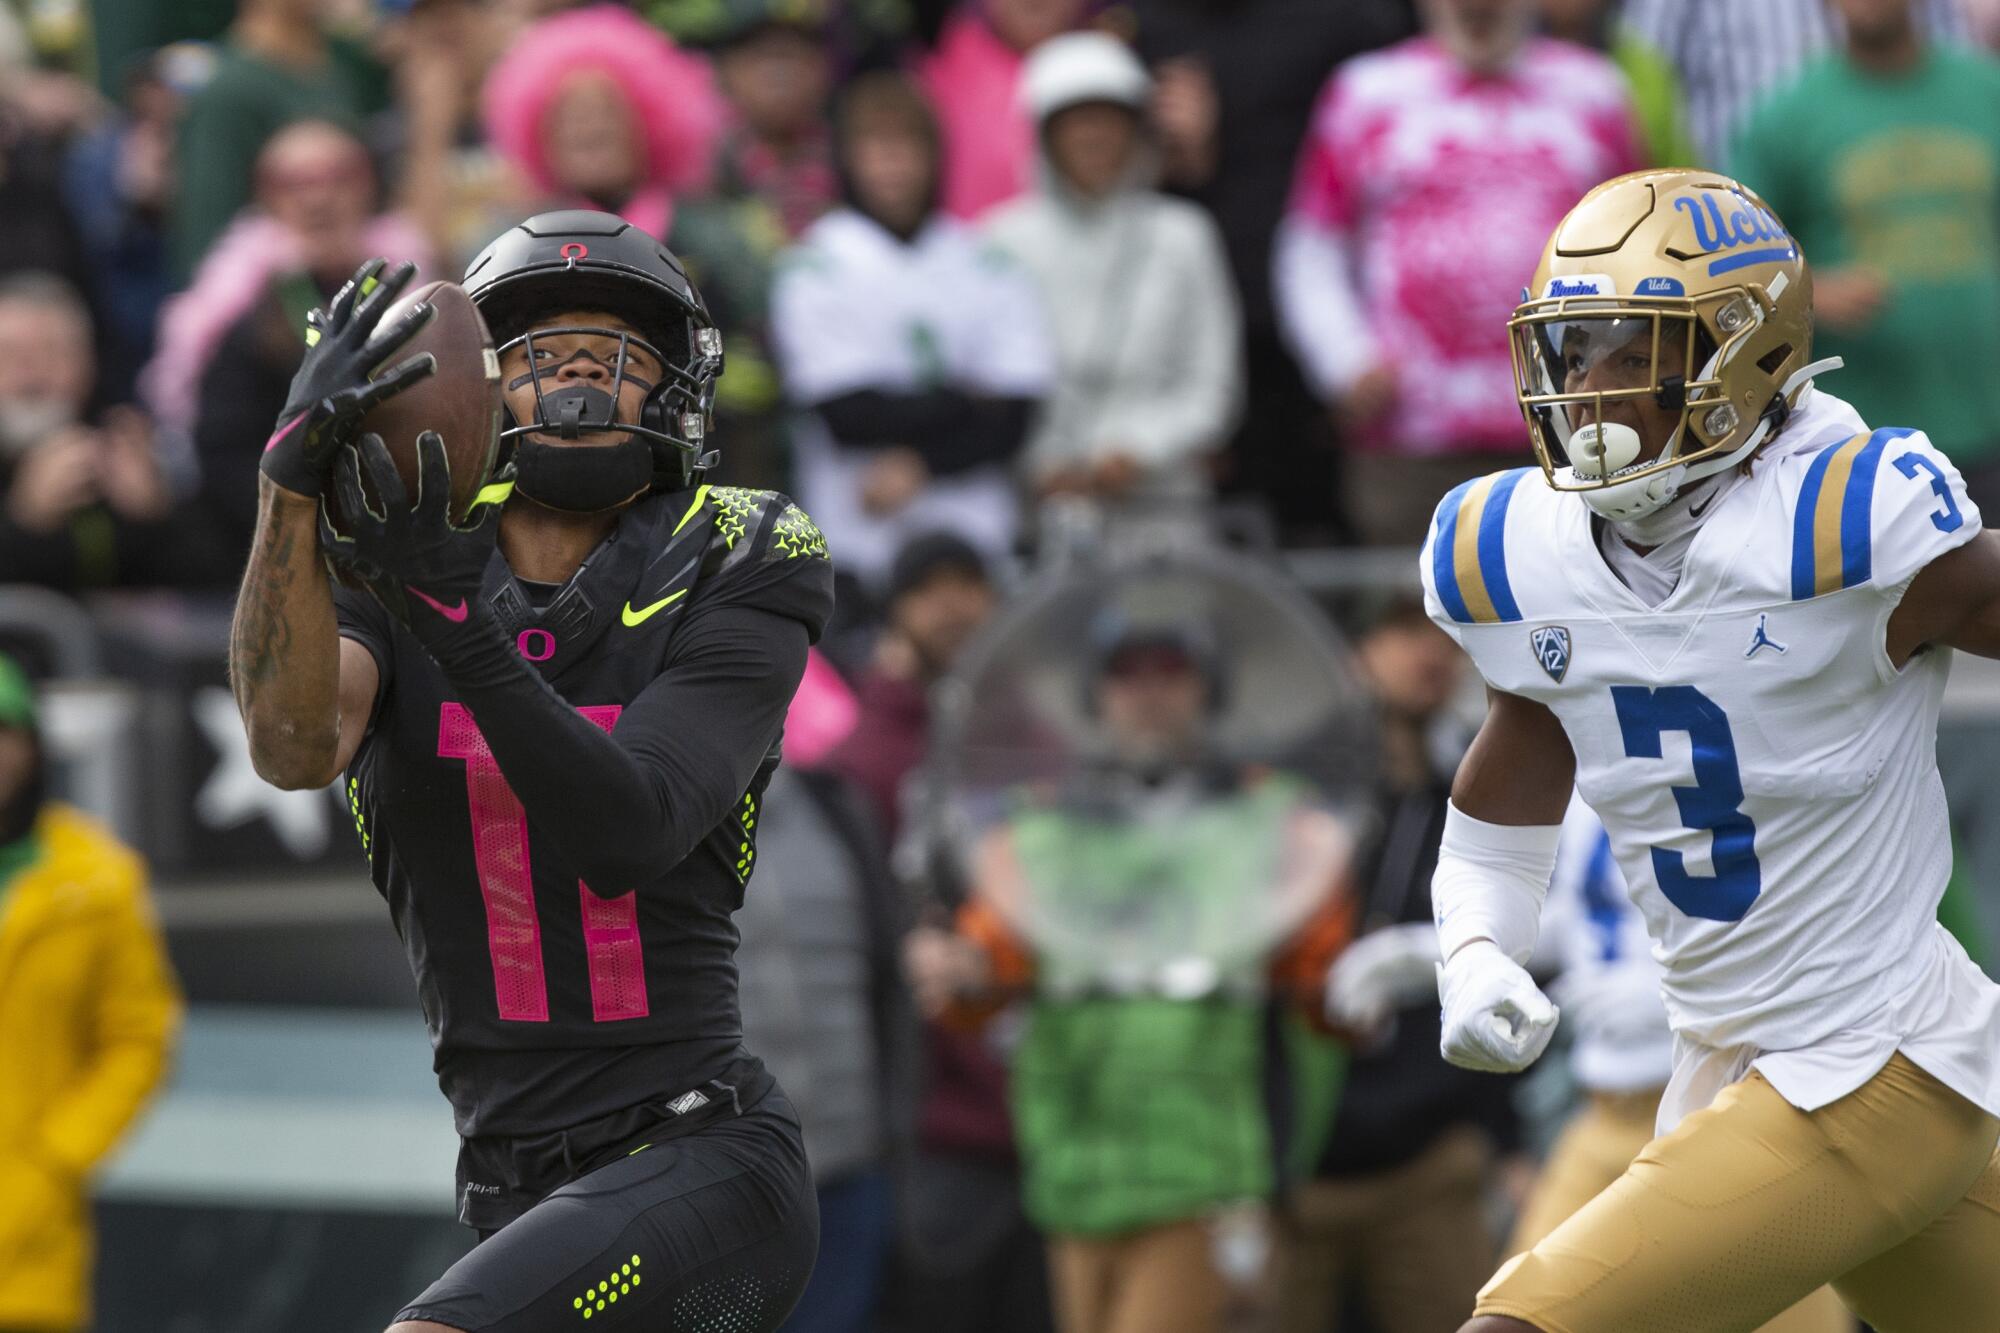 Oregon wide receiver Troy Franklin, left, hauls in a touchdown pass ahead of UCLA defensive back Devin Kirkwood.